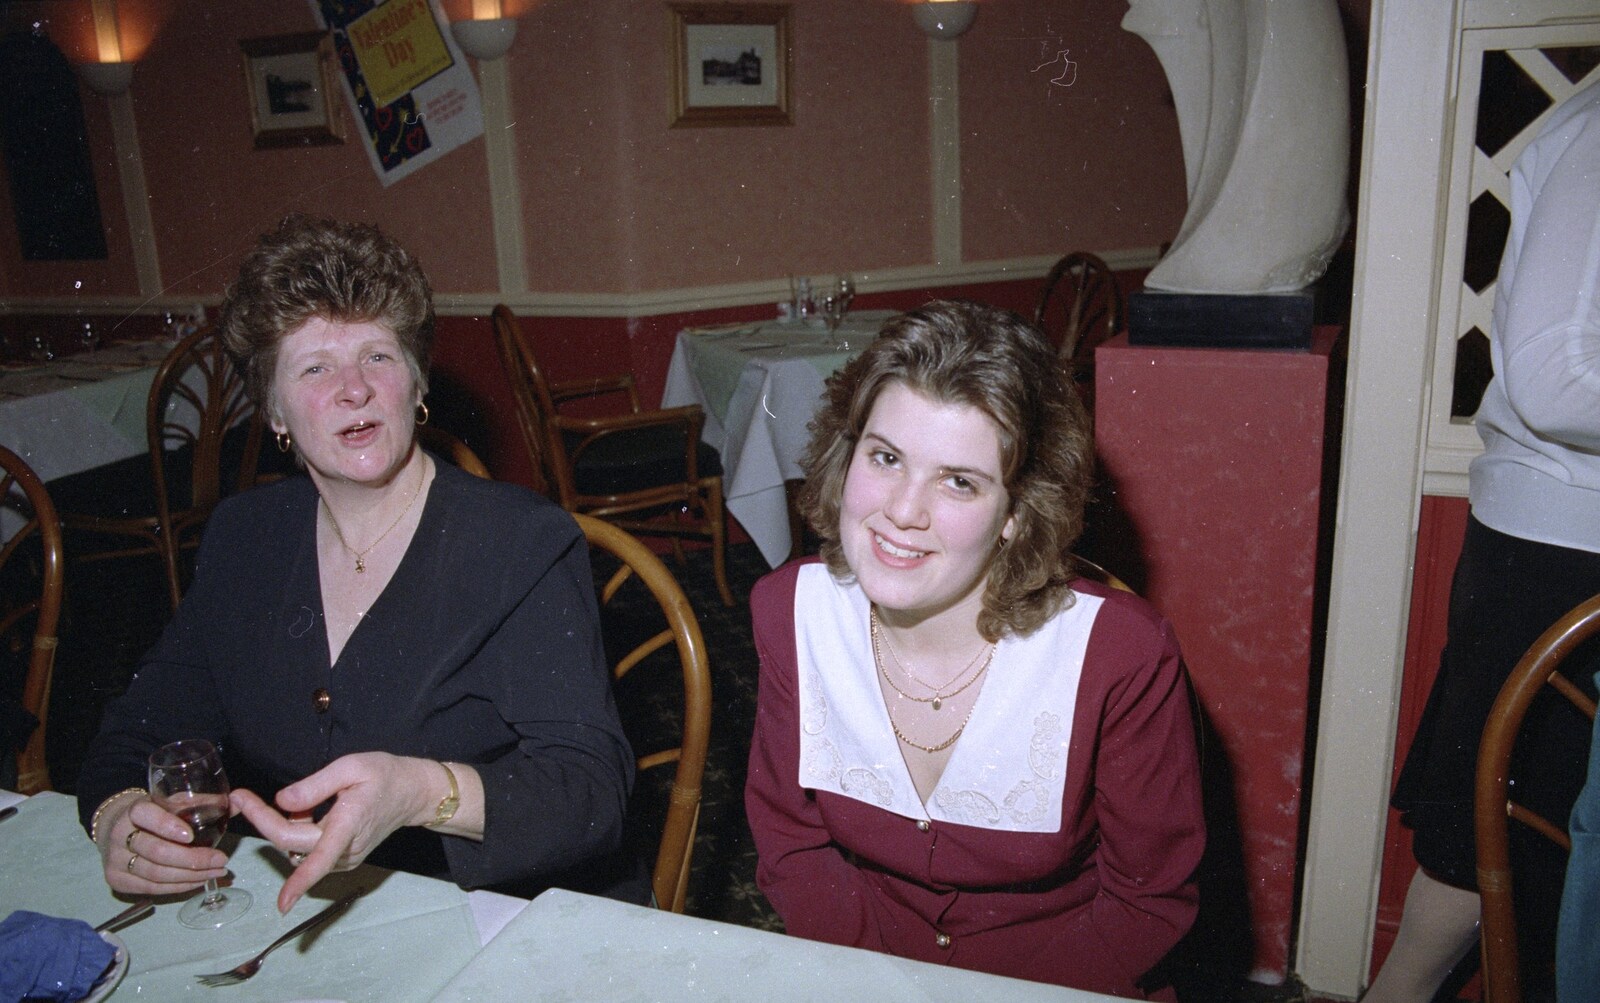 Pam and Kelly Pitcher from Printec at the Park Hotel, Diss, Norfolk - 14th January 1992